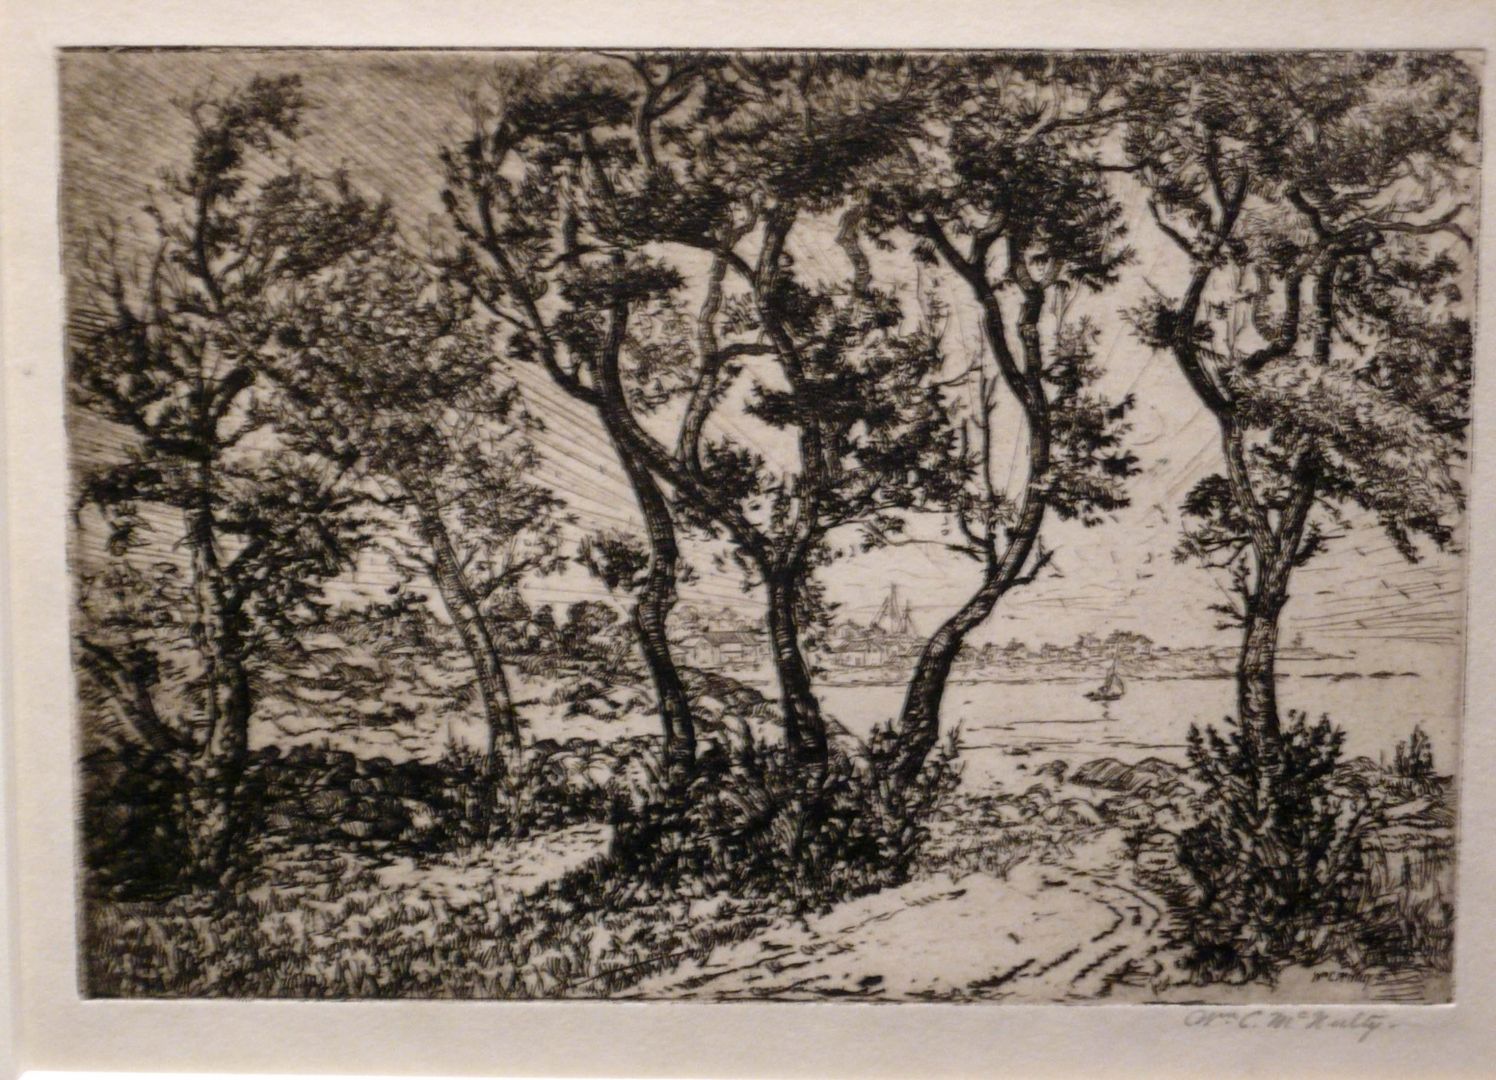 UNTITLED - RIVER SCENE WITH TREES